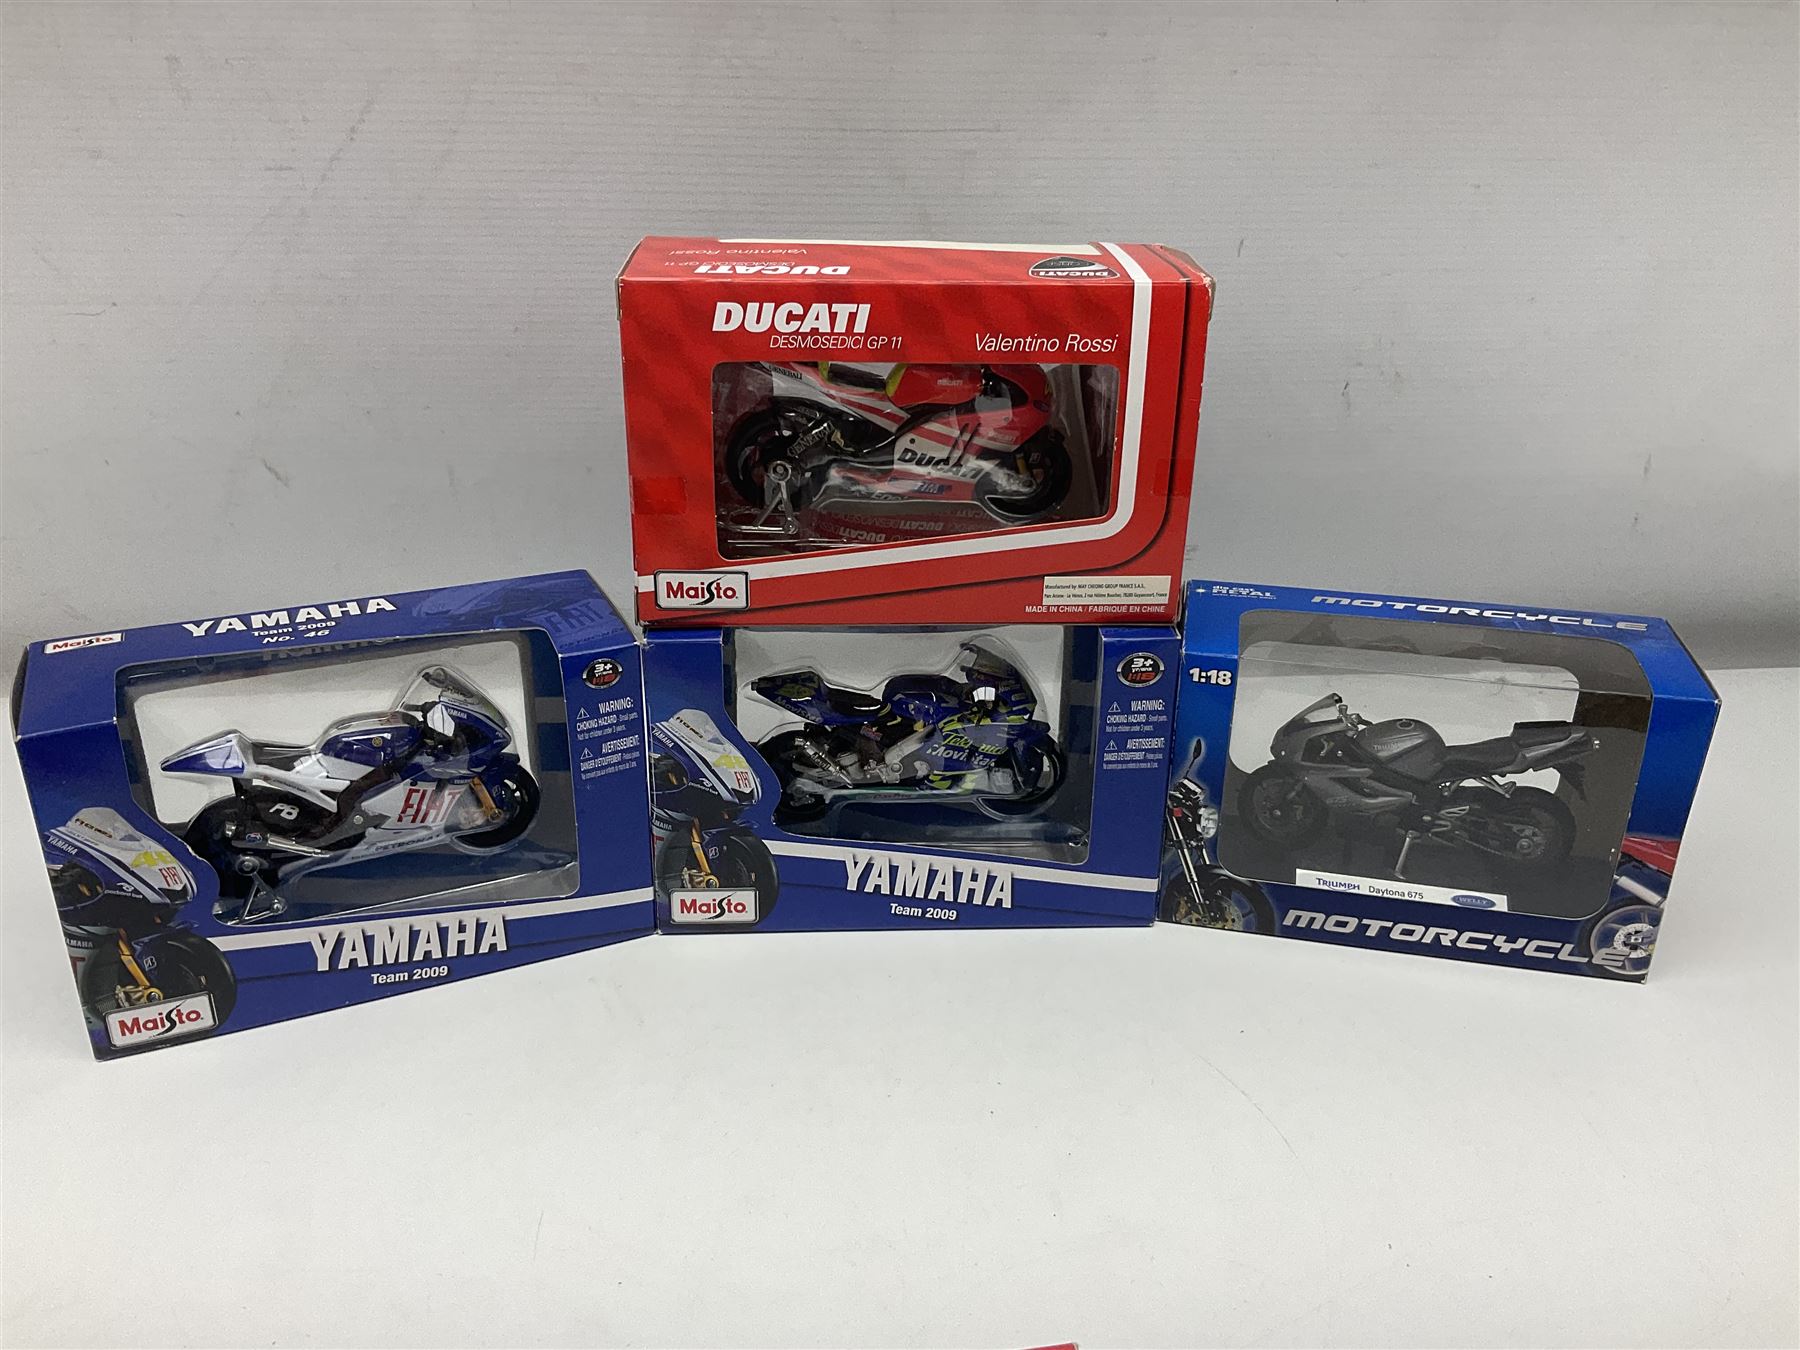 Fifty-one die-cast models of motorcycles by Maisto - Image 18 of 18